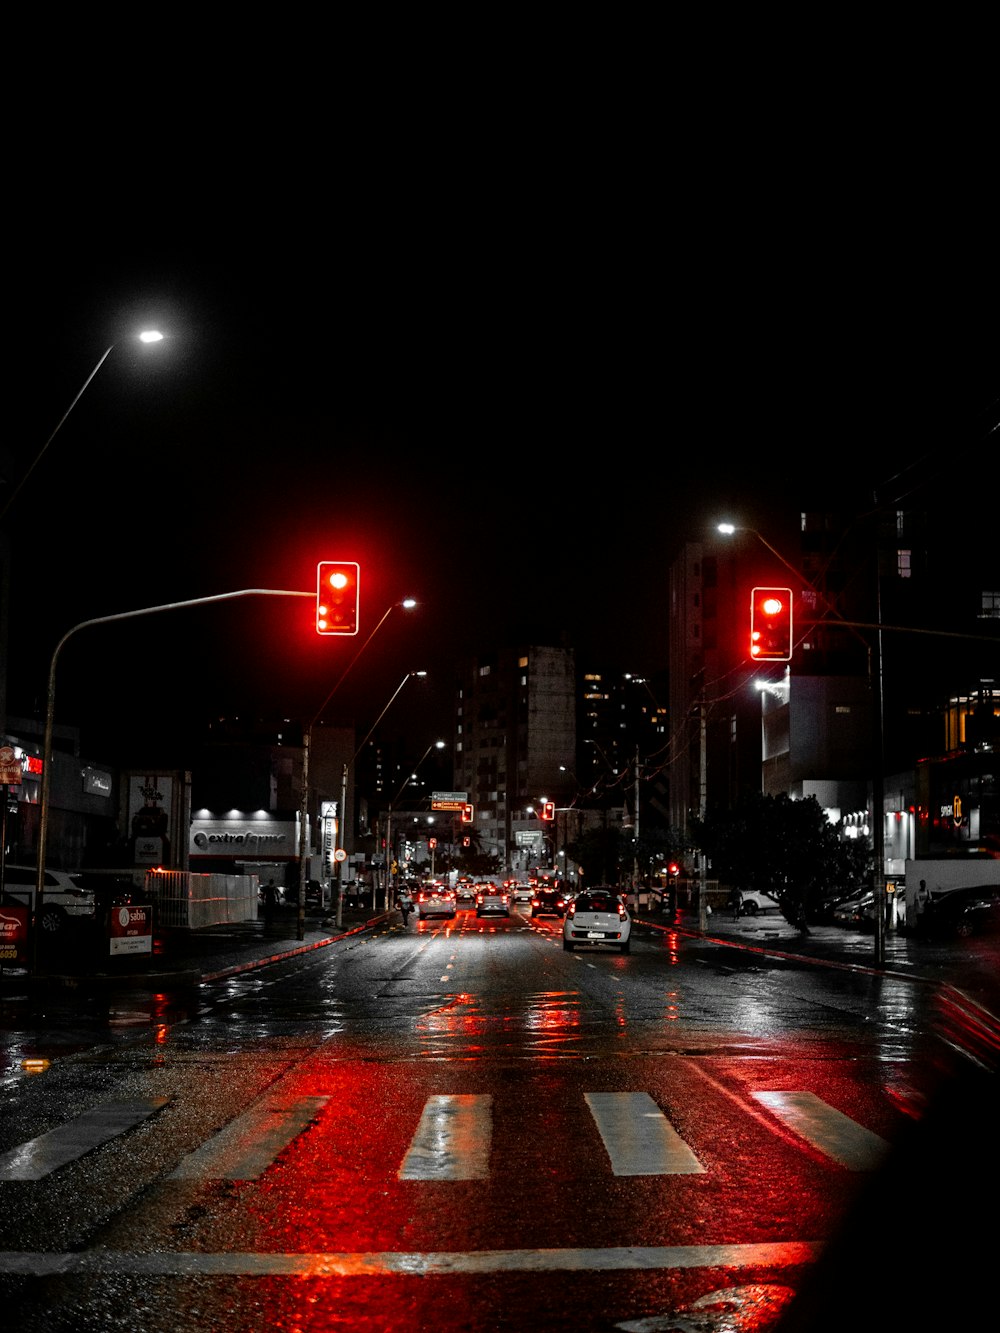 a city street at night with a red traffic light